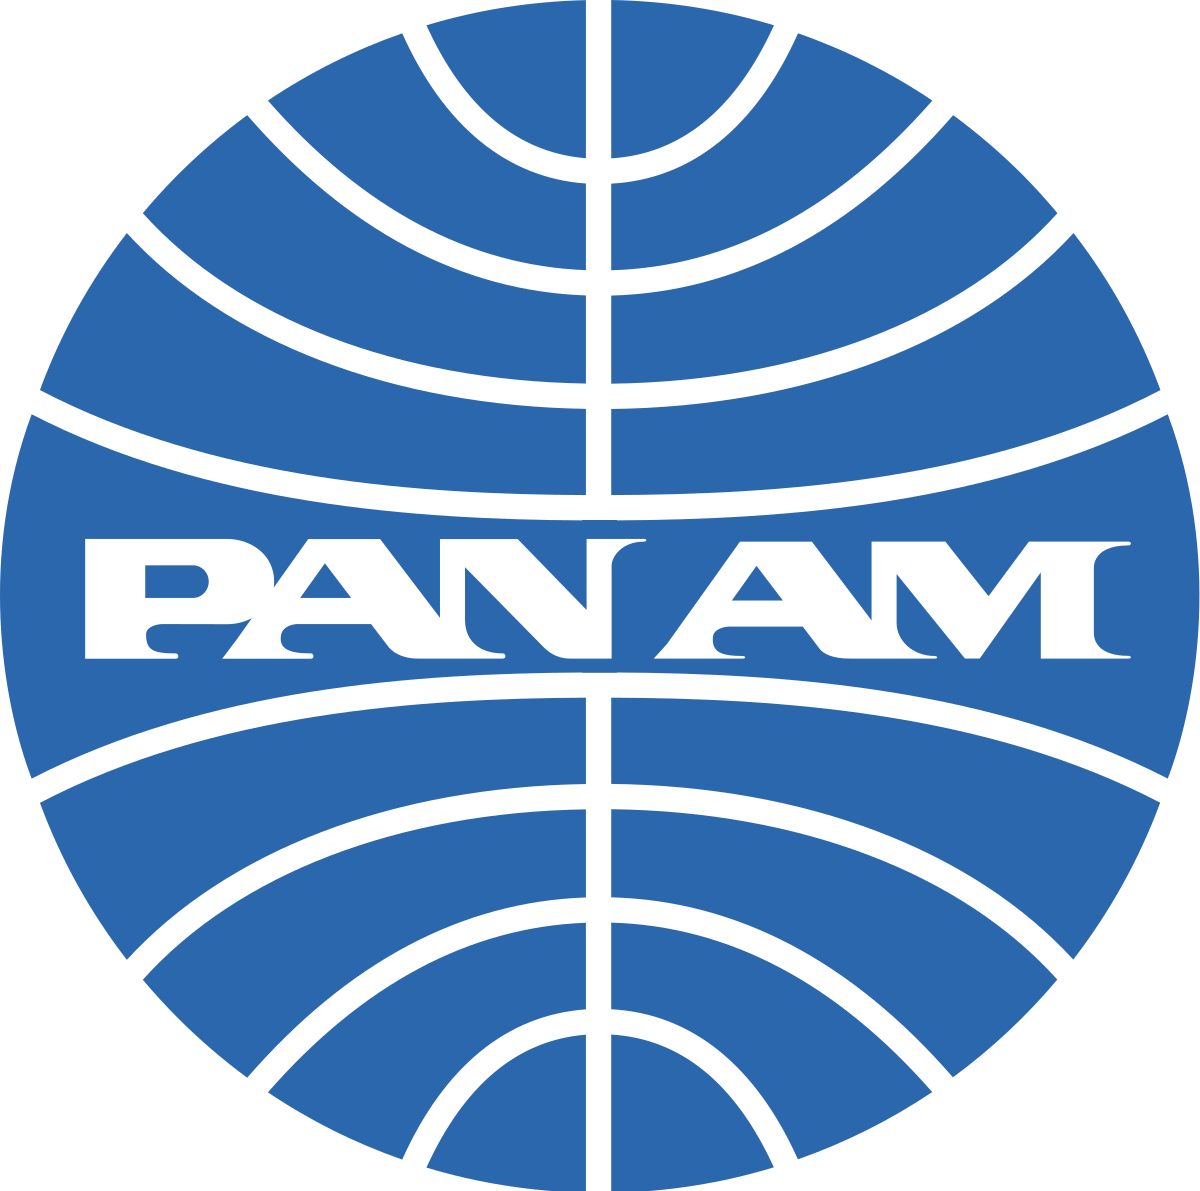 MUSE Advertising Awards - The Pan Am Podcast